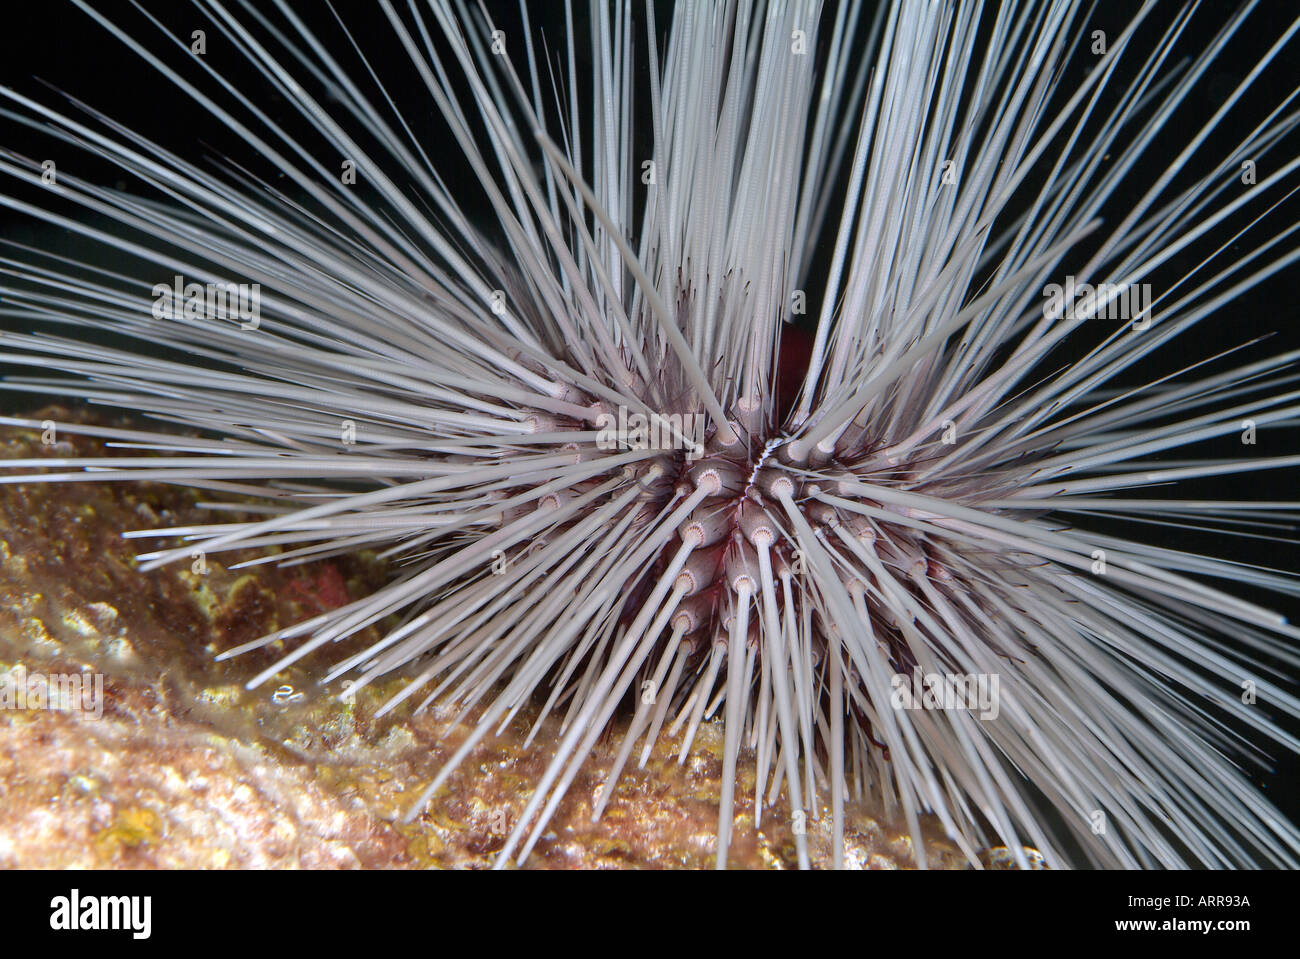 Marine life in the Gulf of Mexico long spined urchin Stock Photo